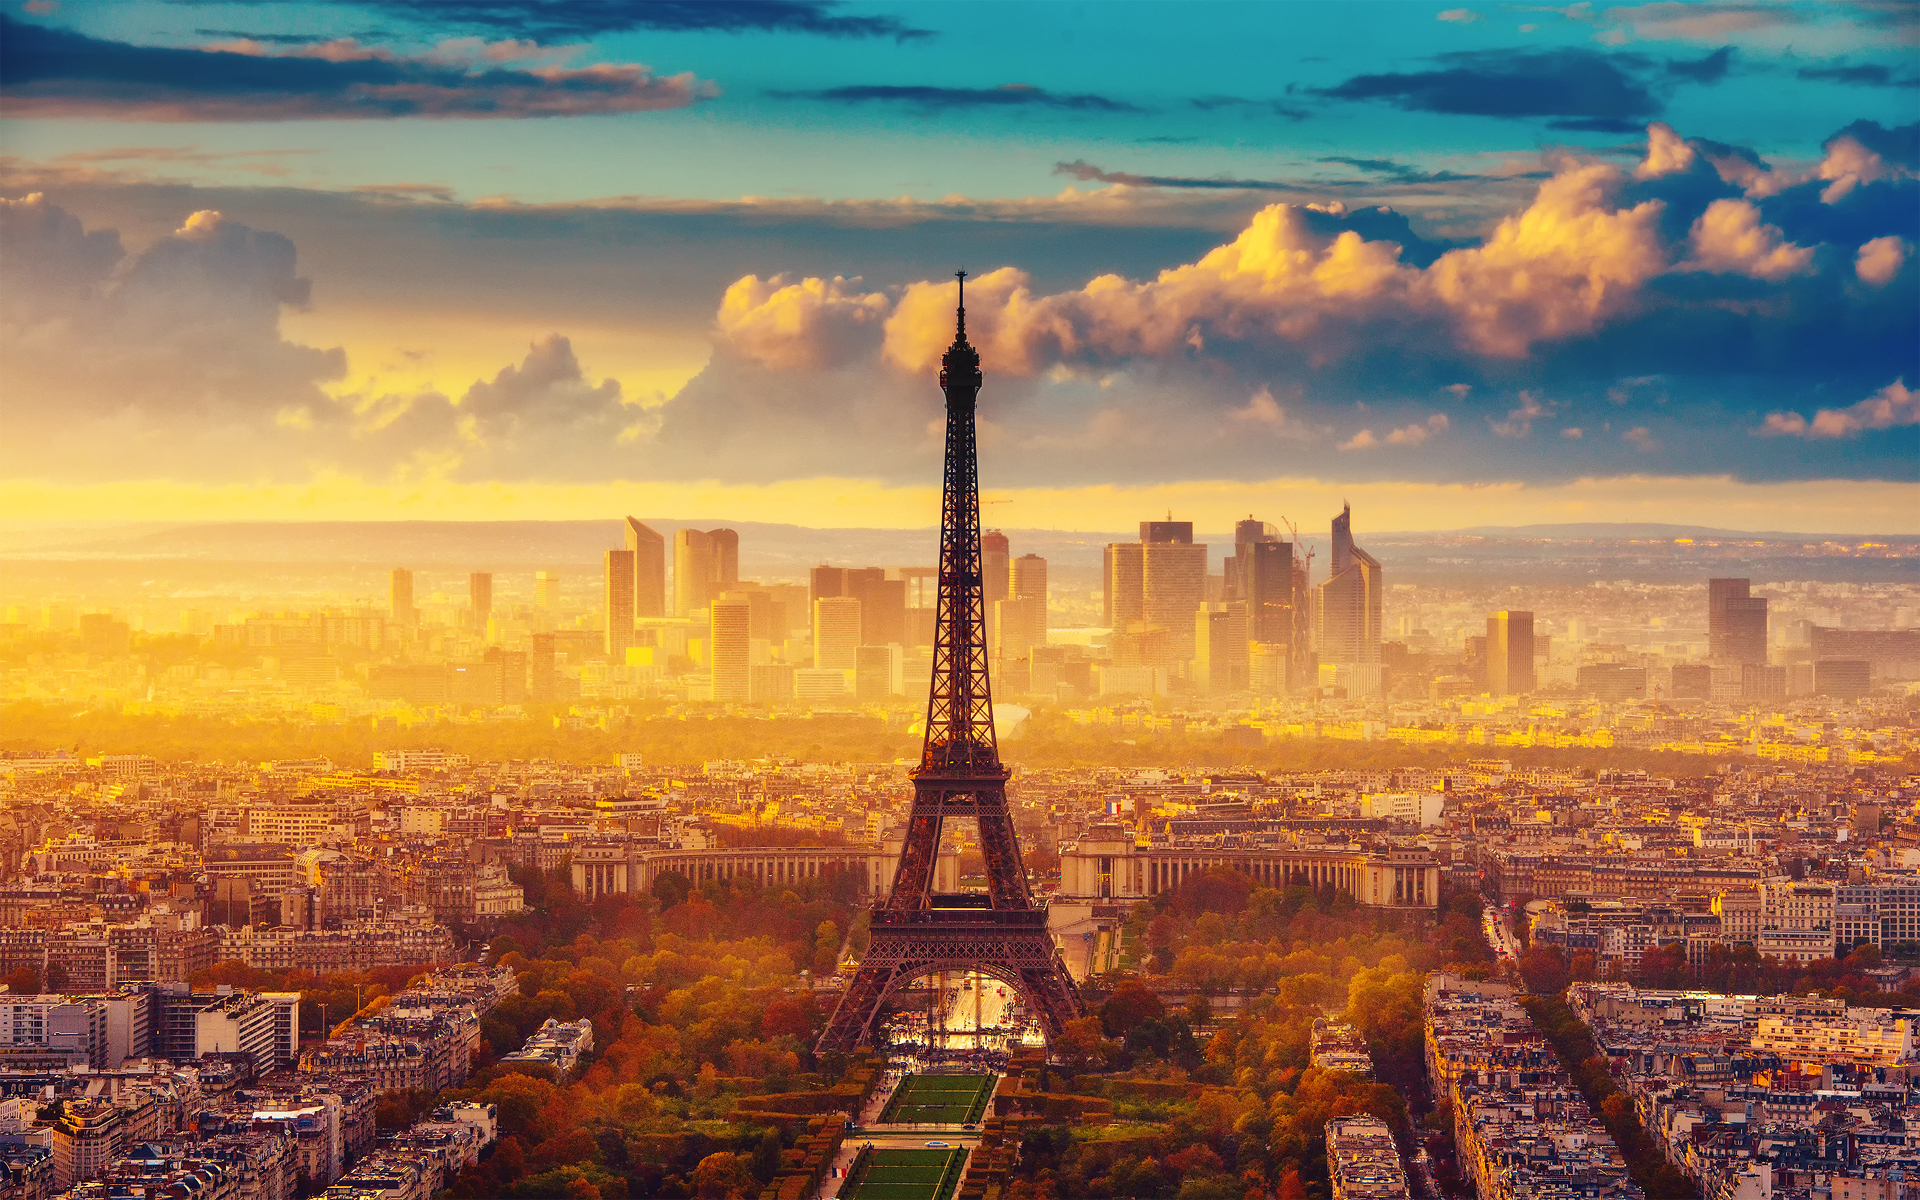 Paris France Wallpaper submited images